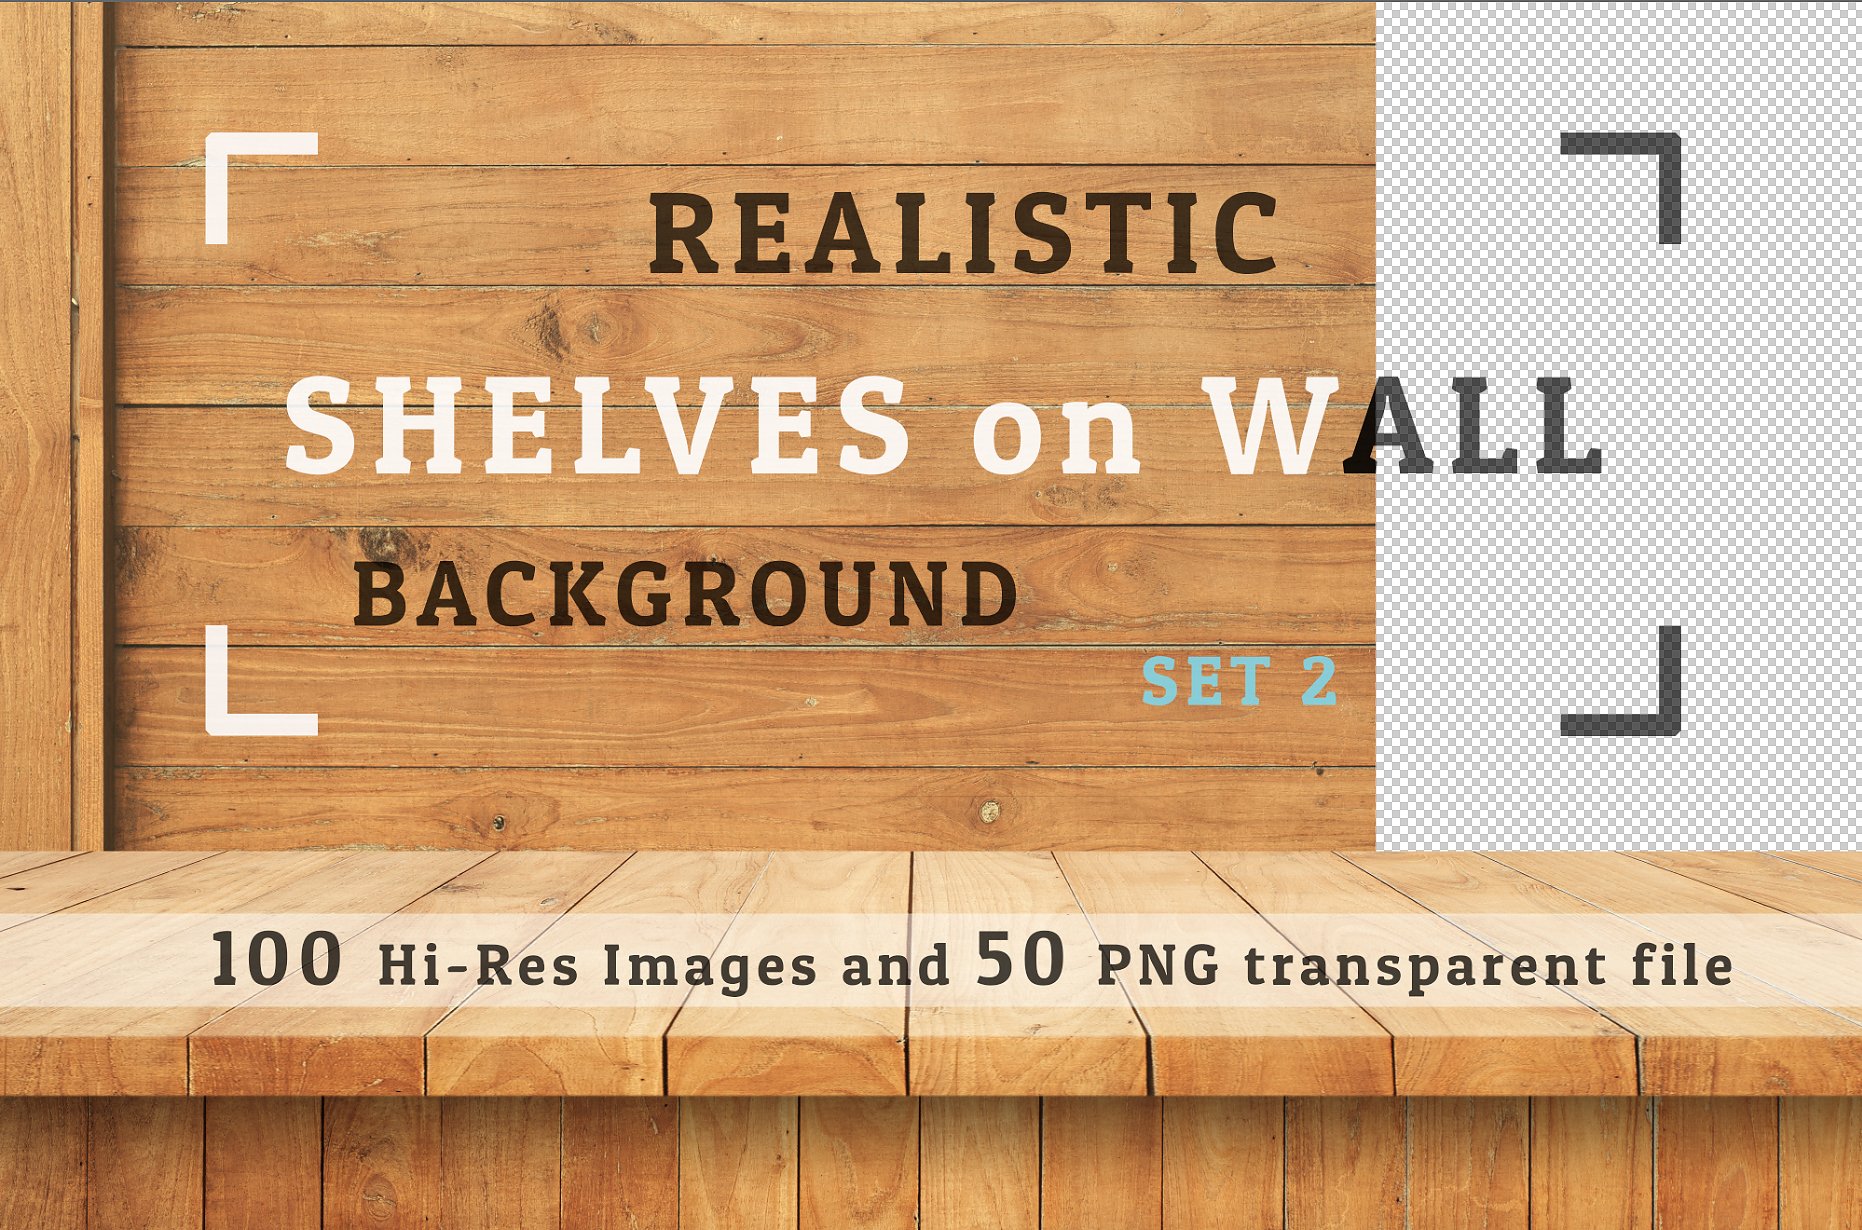 100 2 realistic shelves and wall background set 2 cover in 8 aug 2016 612